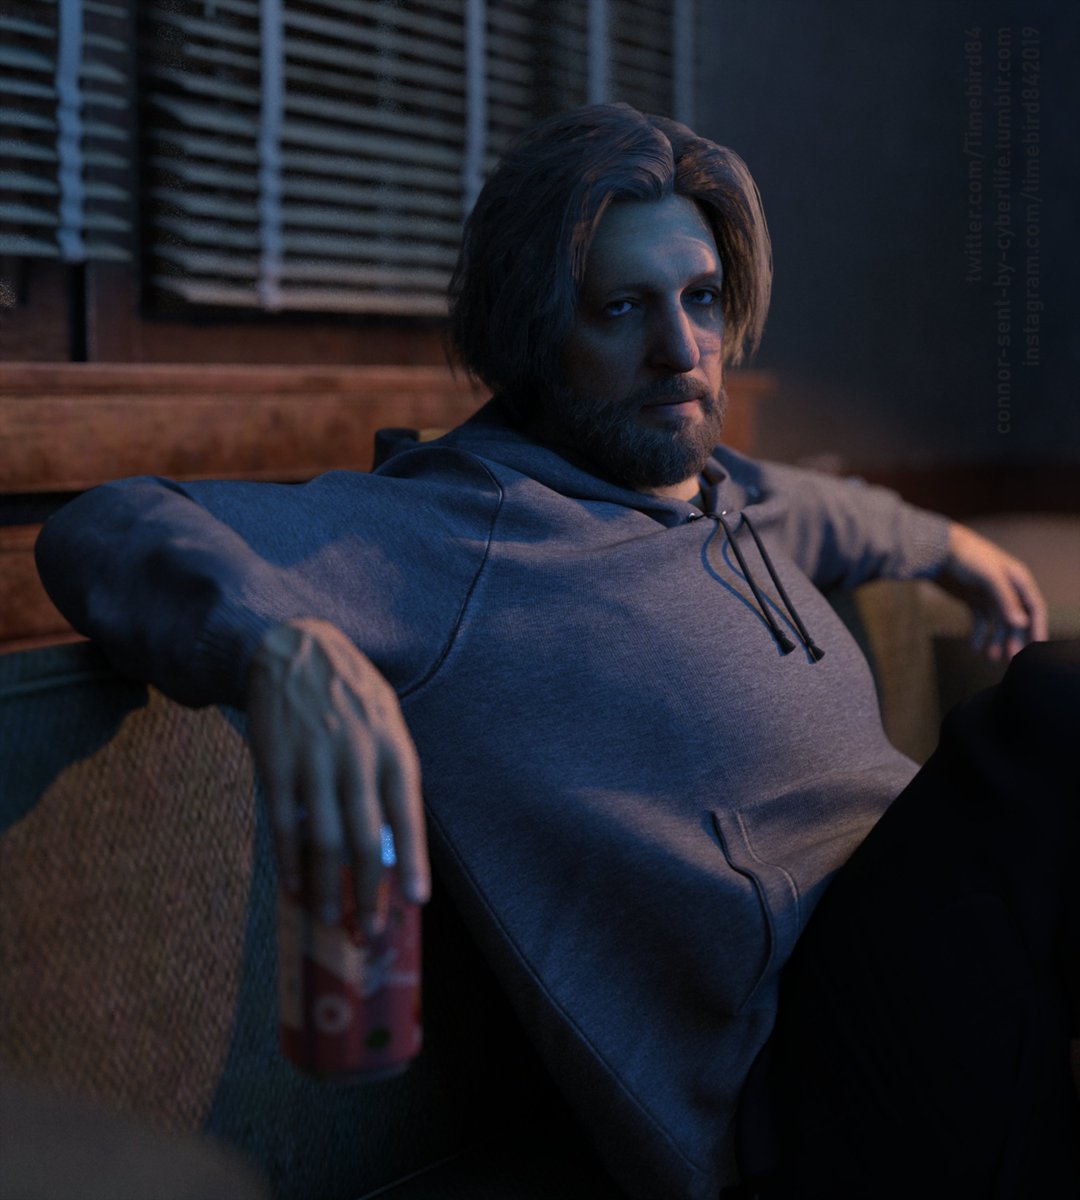 When you're stuck at a cheap motel, because your car broke down in the middle of the night and nowhere during a rainstorm and the only drink available is a soda that tastes like shit. But at least you had a warm shower and you're dry and somewhat comfy now. #dbh #hankanderson